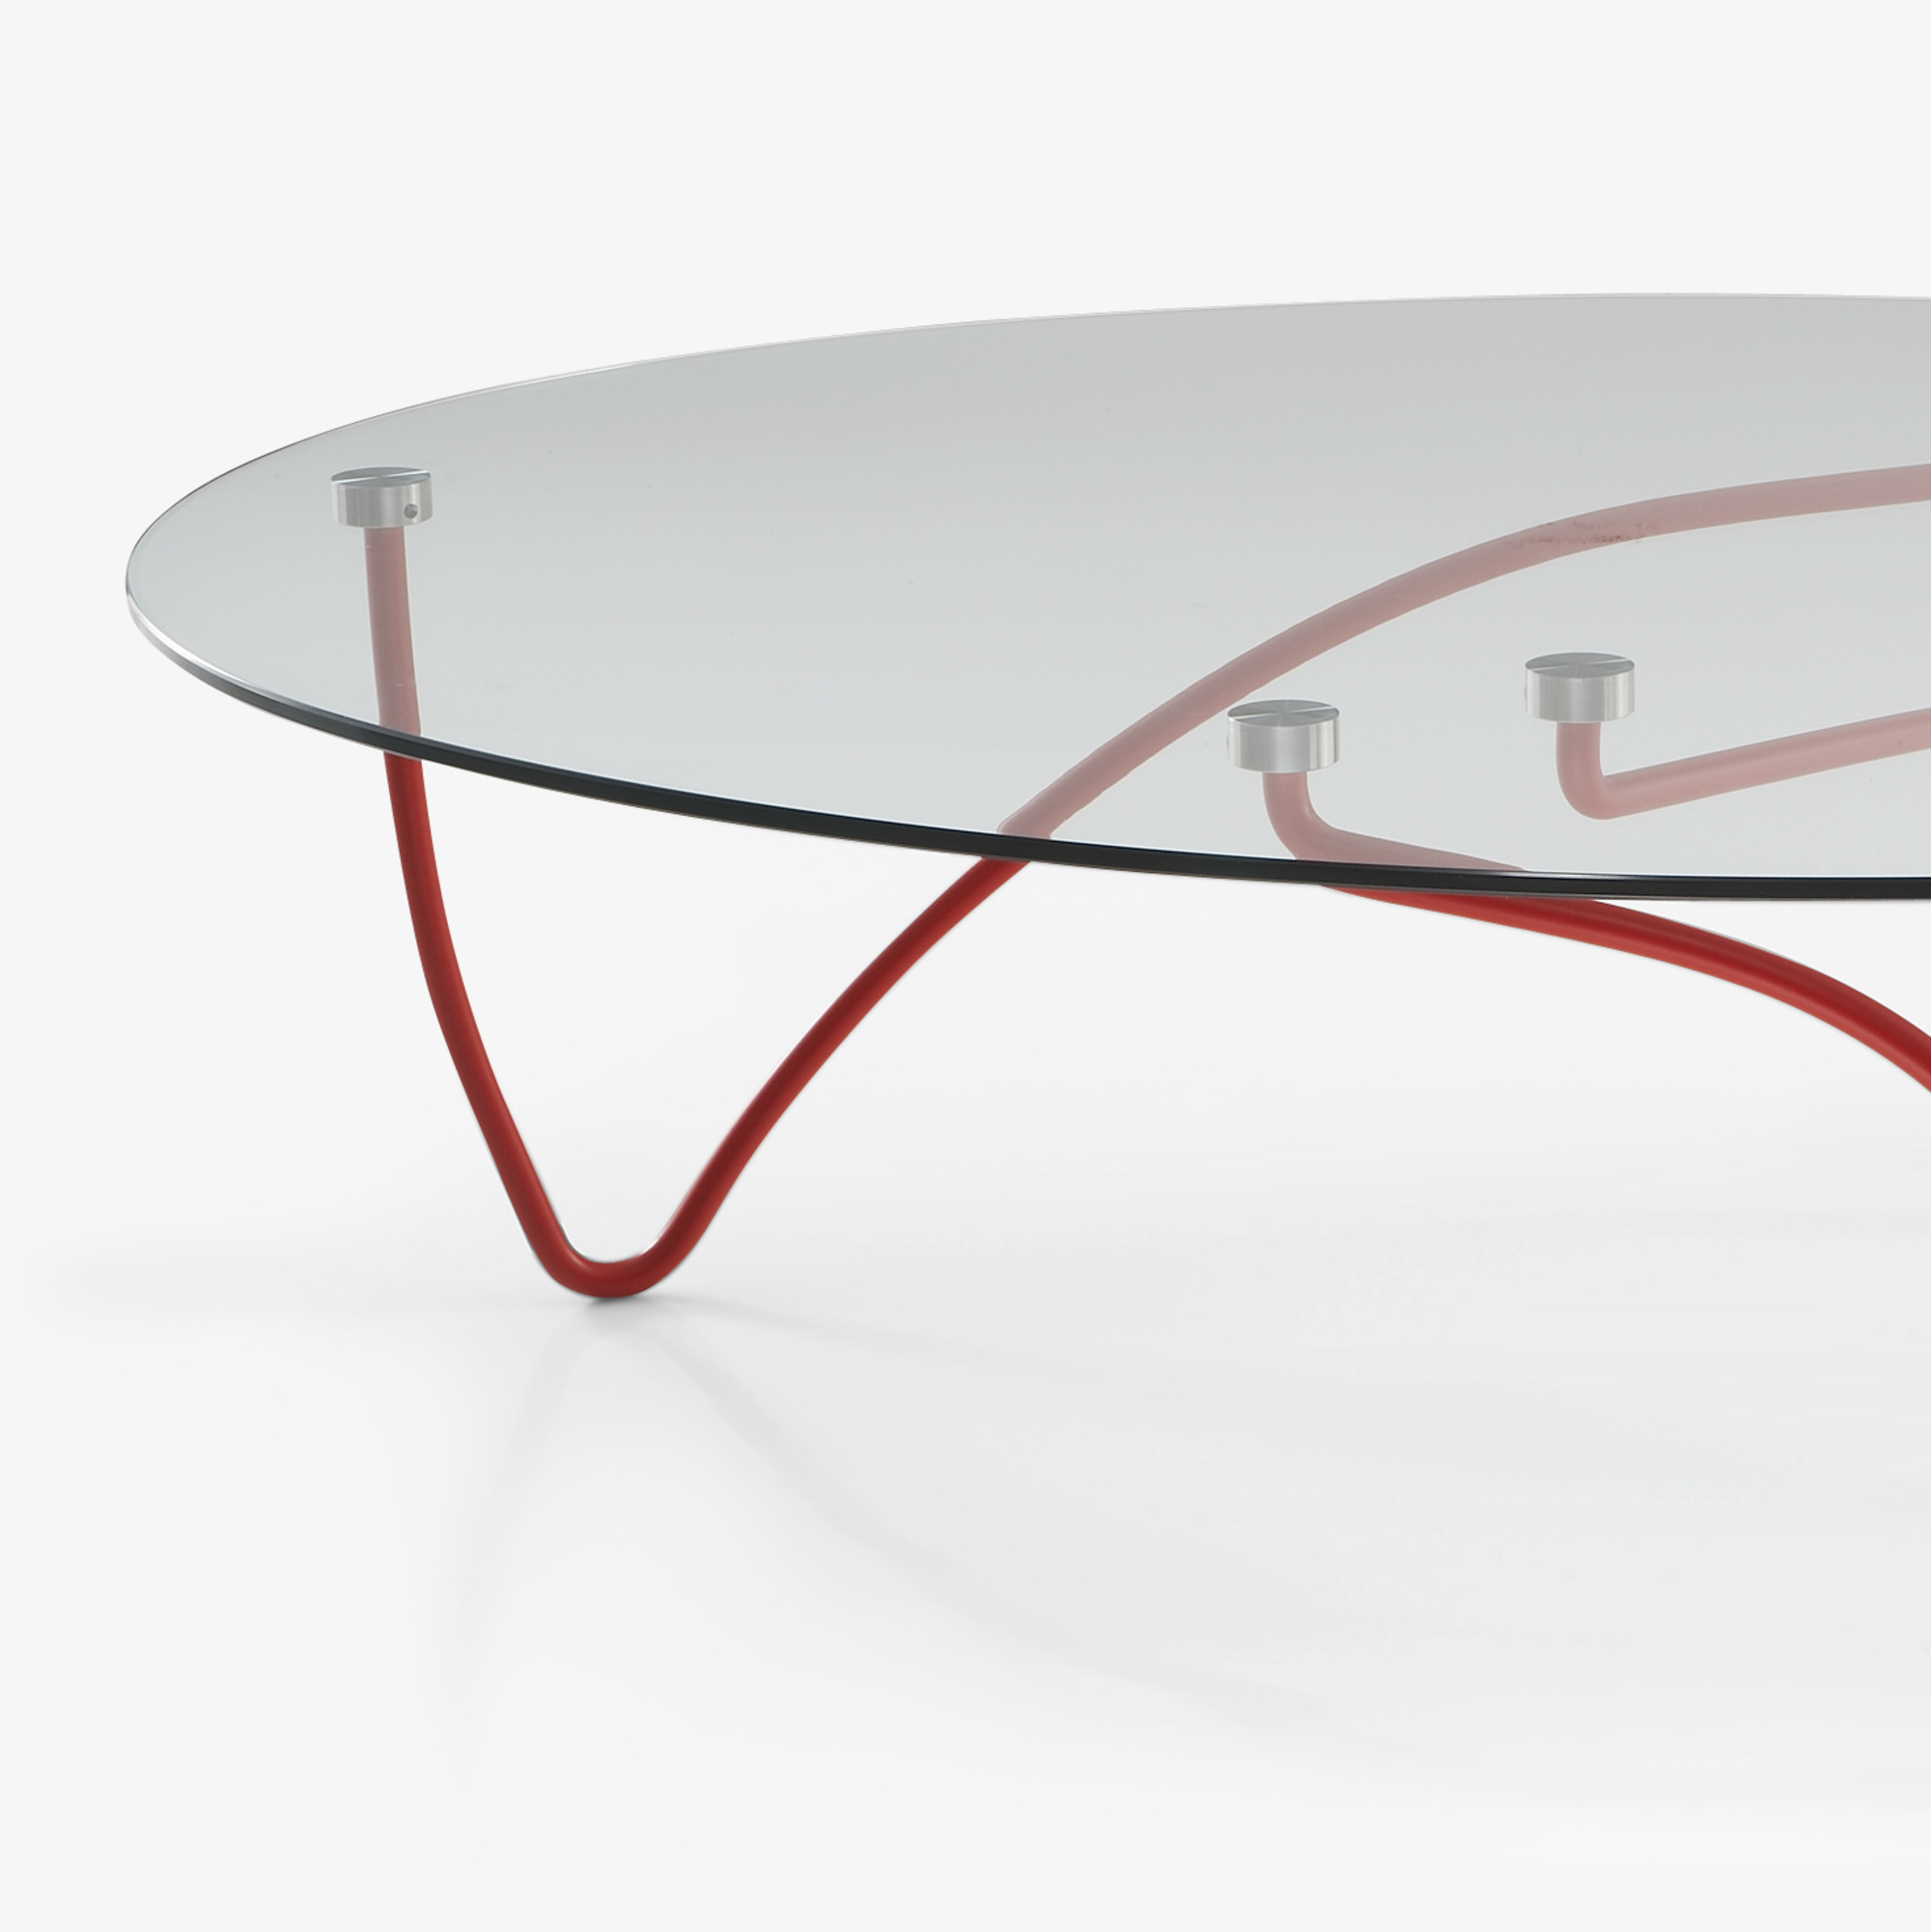 Image Oval low table clear glass top 3